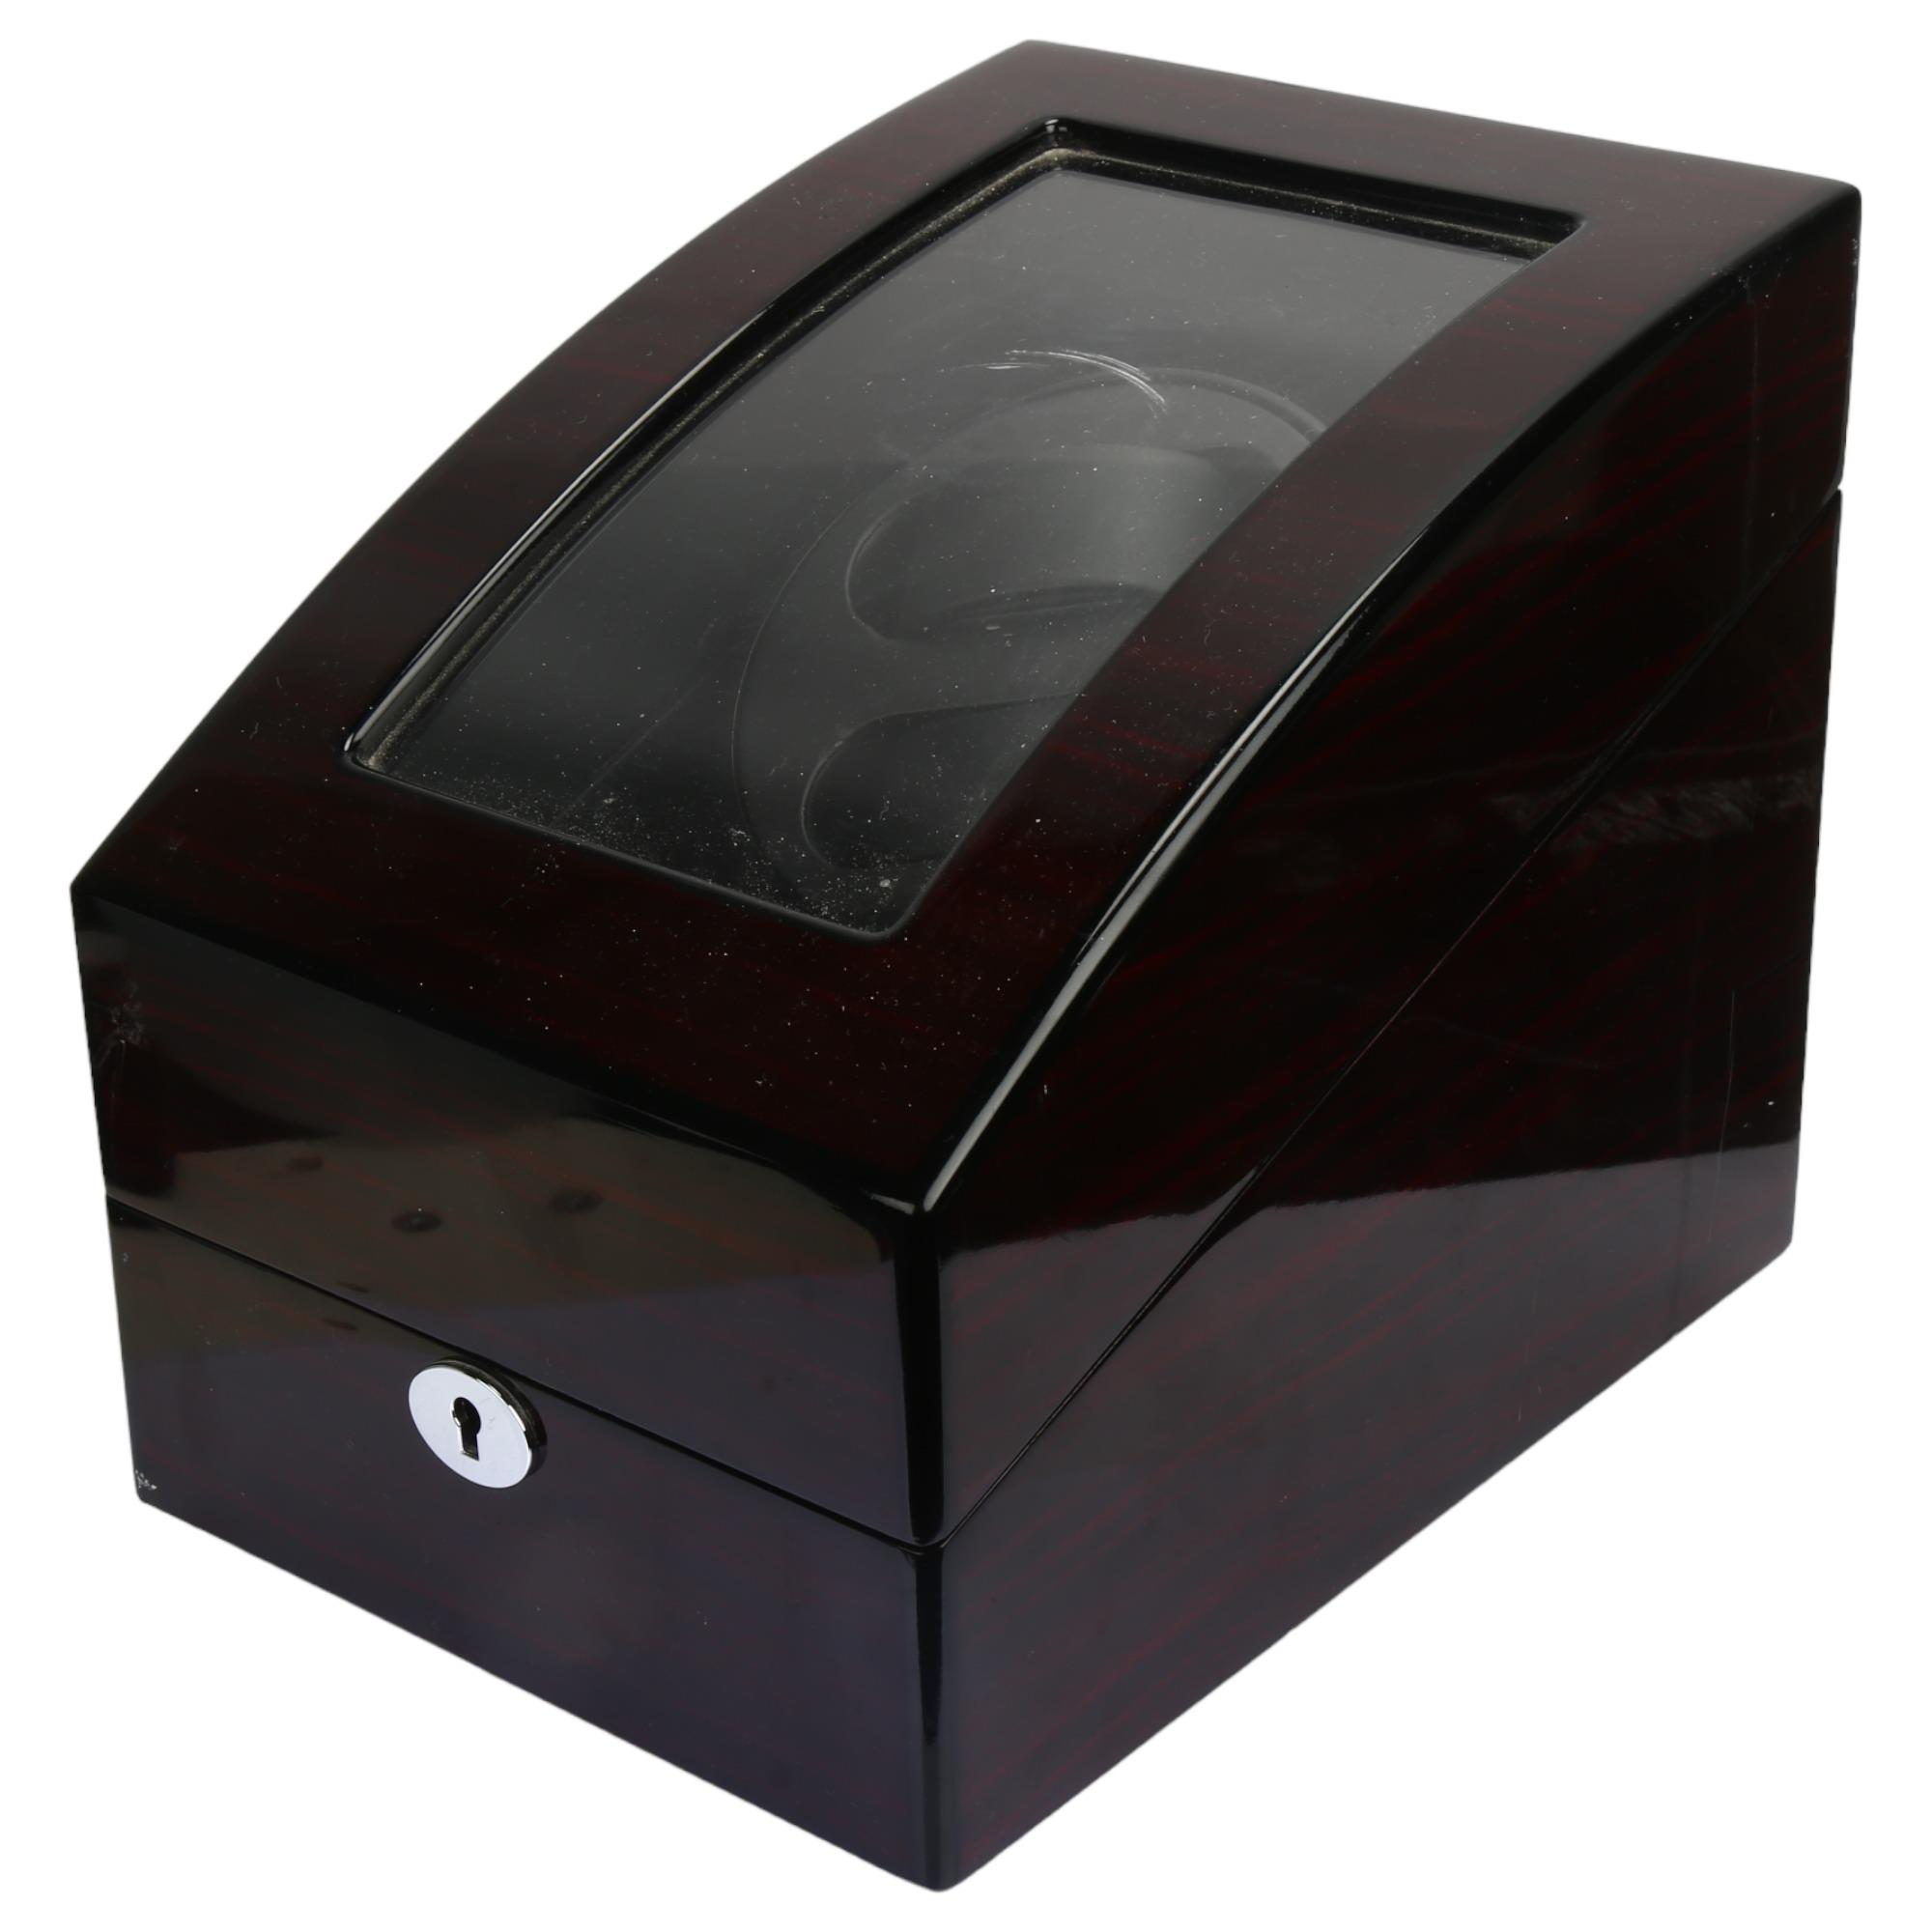 A modern automatic double watch winder, with 3 sub-compartments and mains/battery power, height